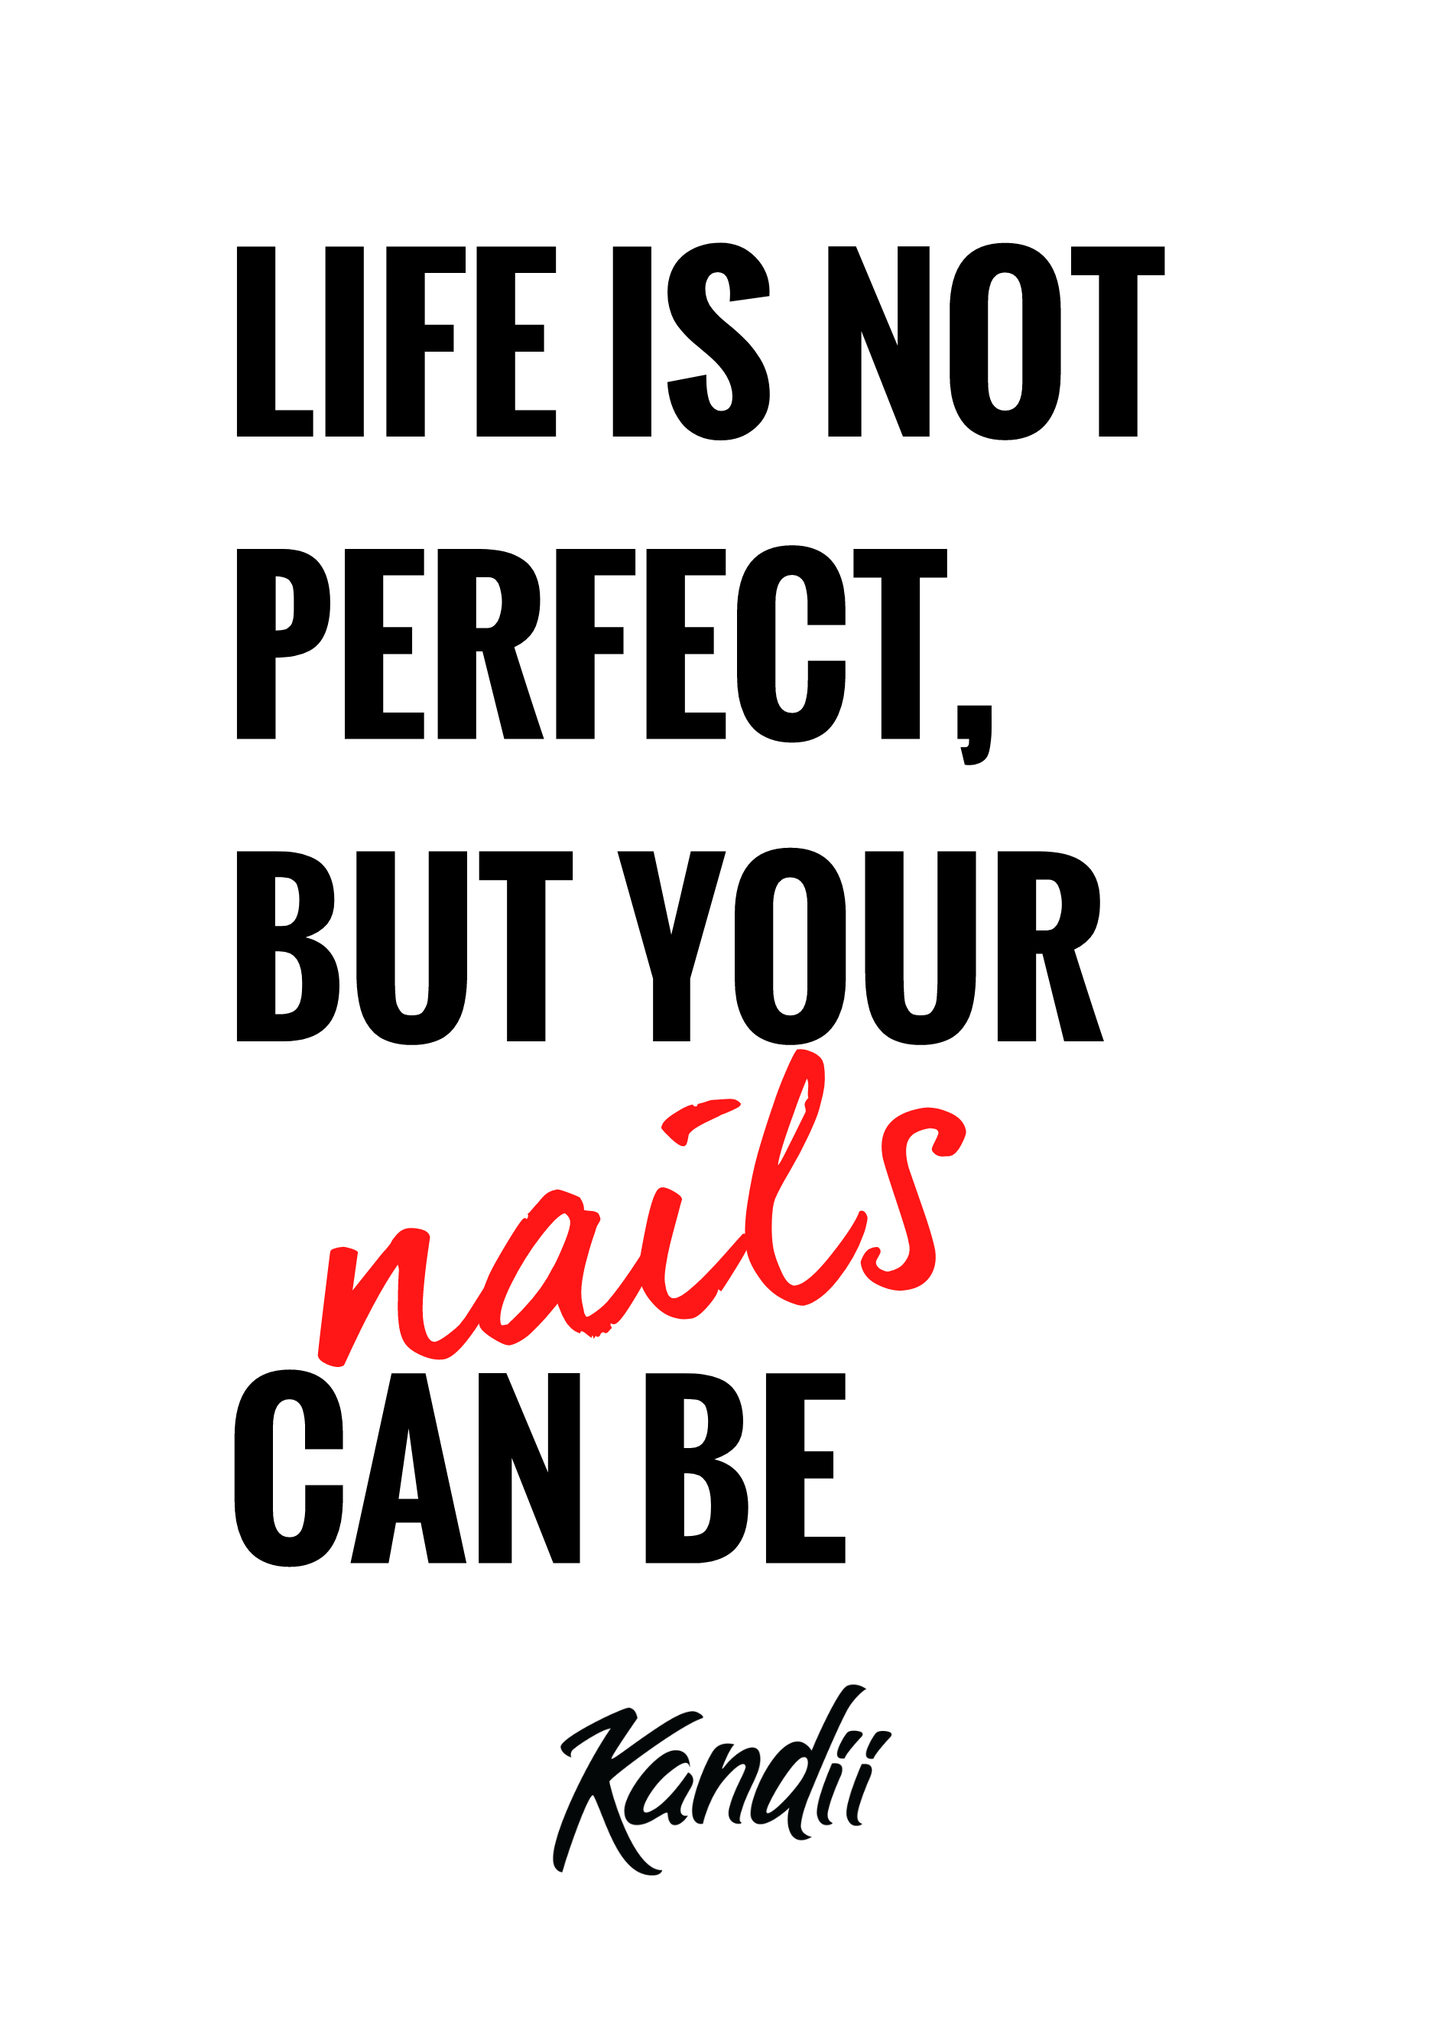 Kandii Posters - Life is not perfect